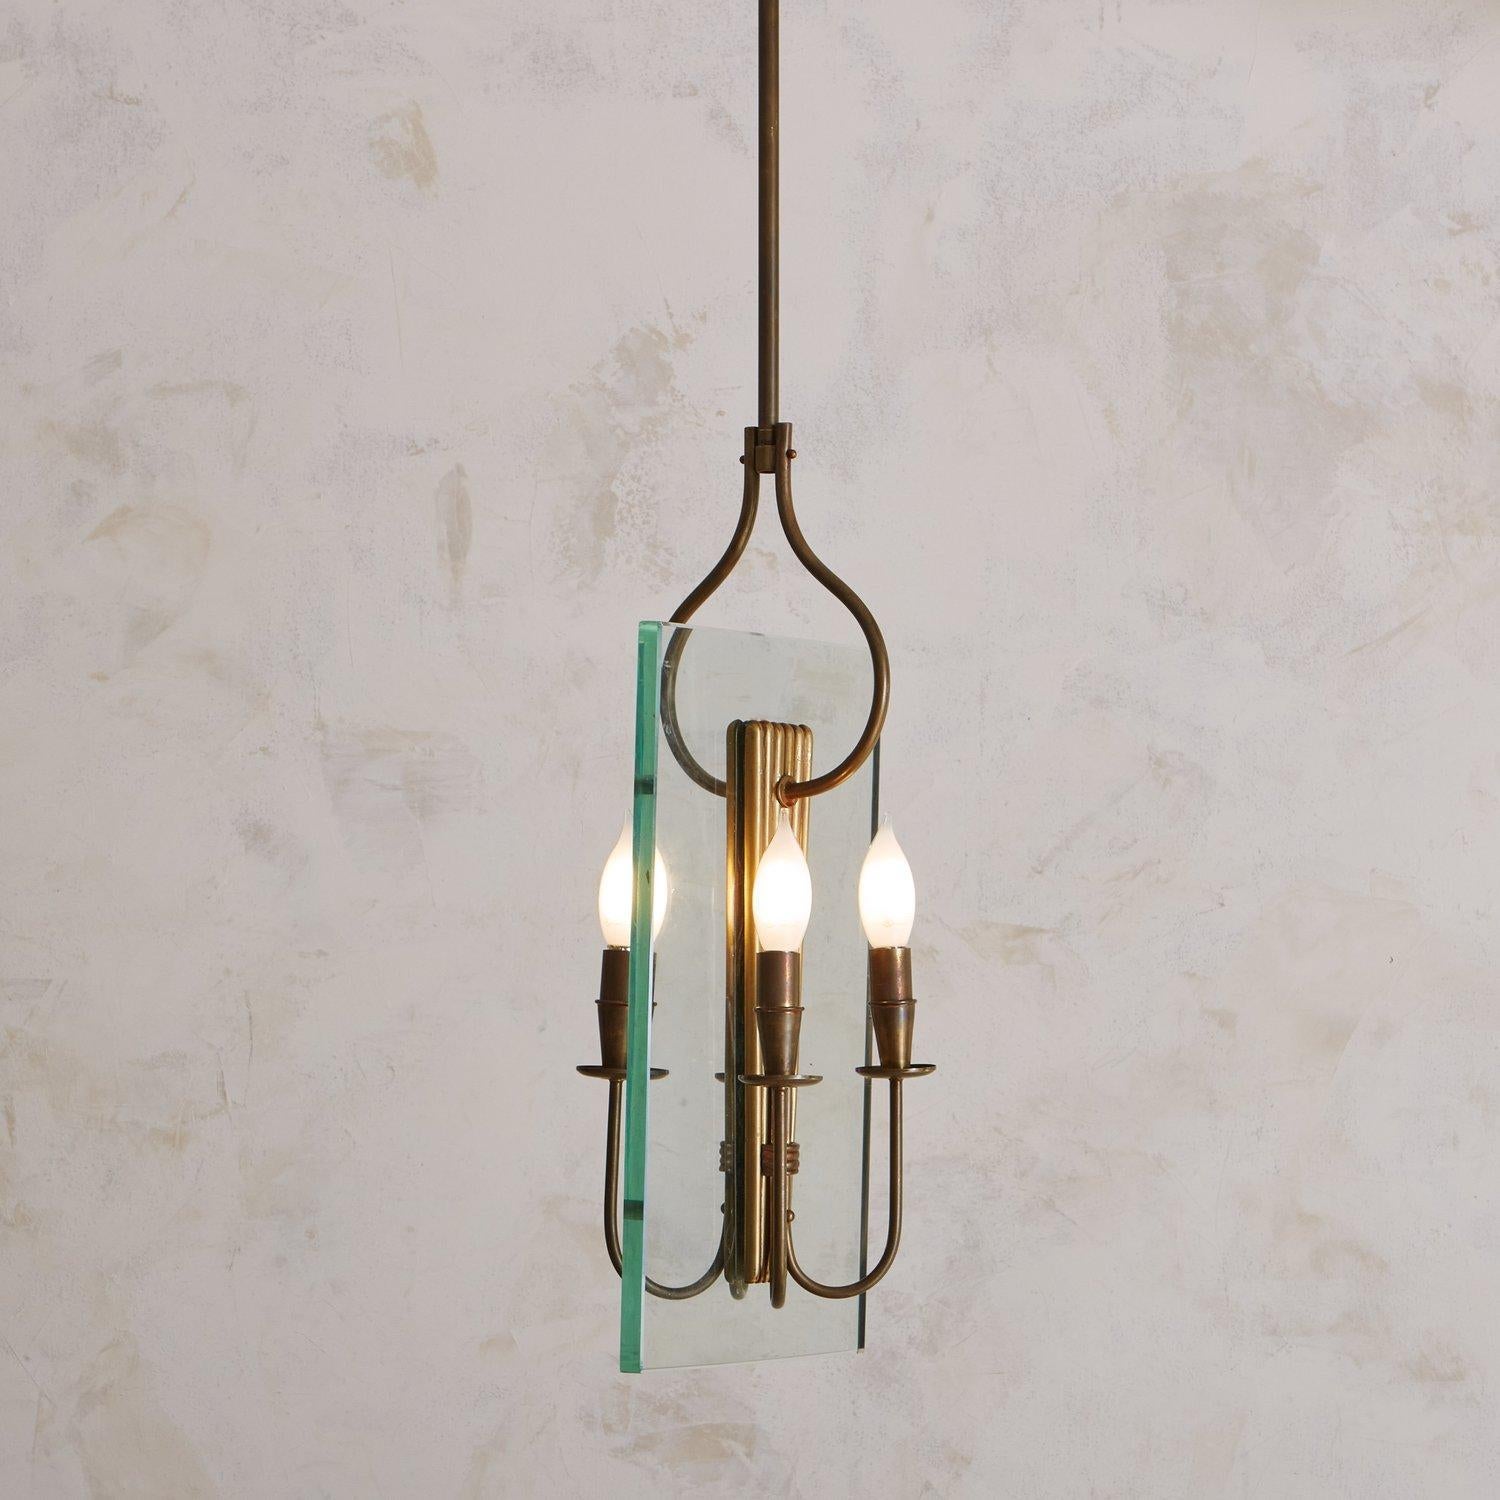 French Brass + Glass Pendant Light in the Style of Fontana Arte, 20th Century For Sale